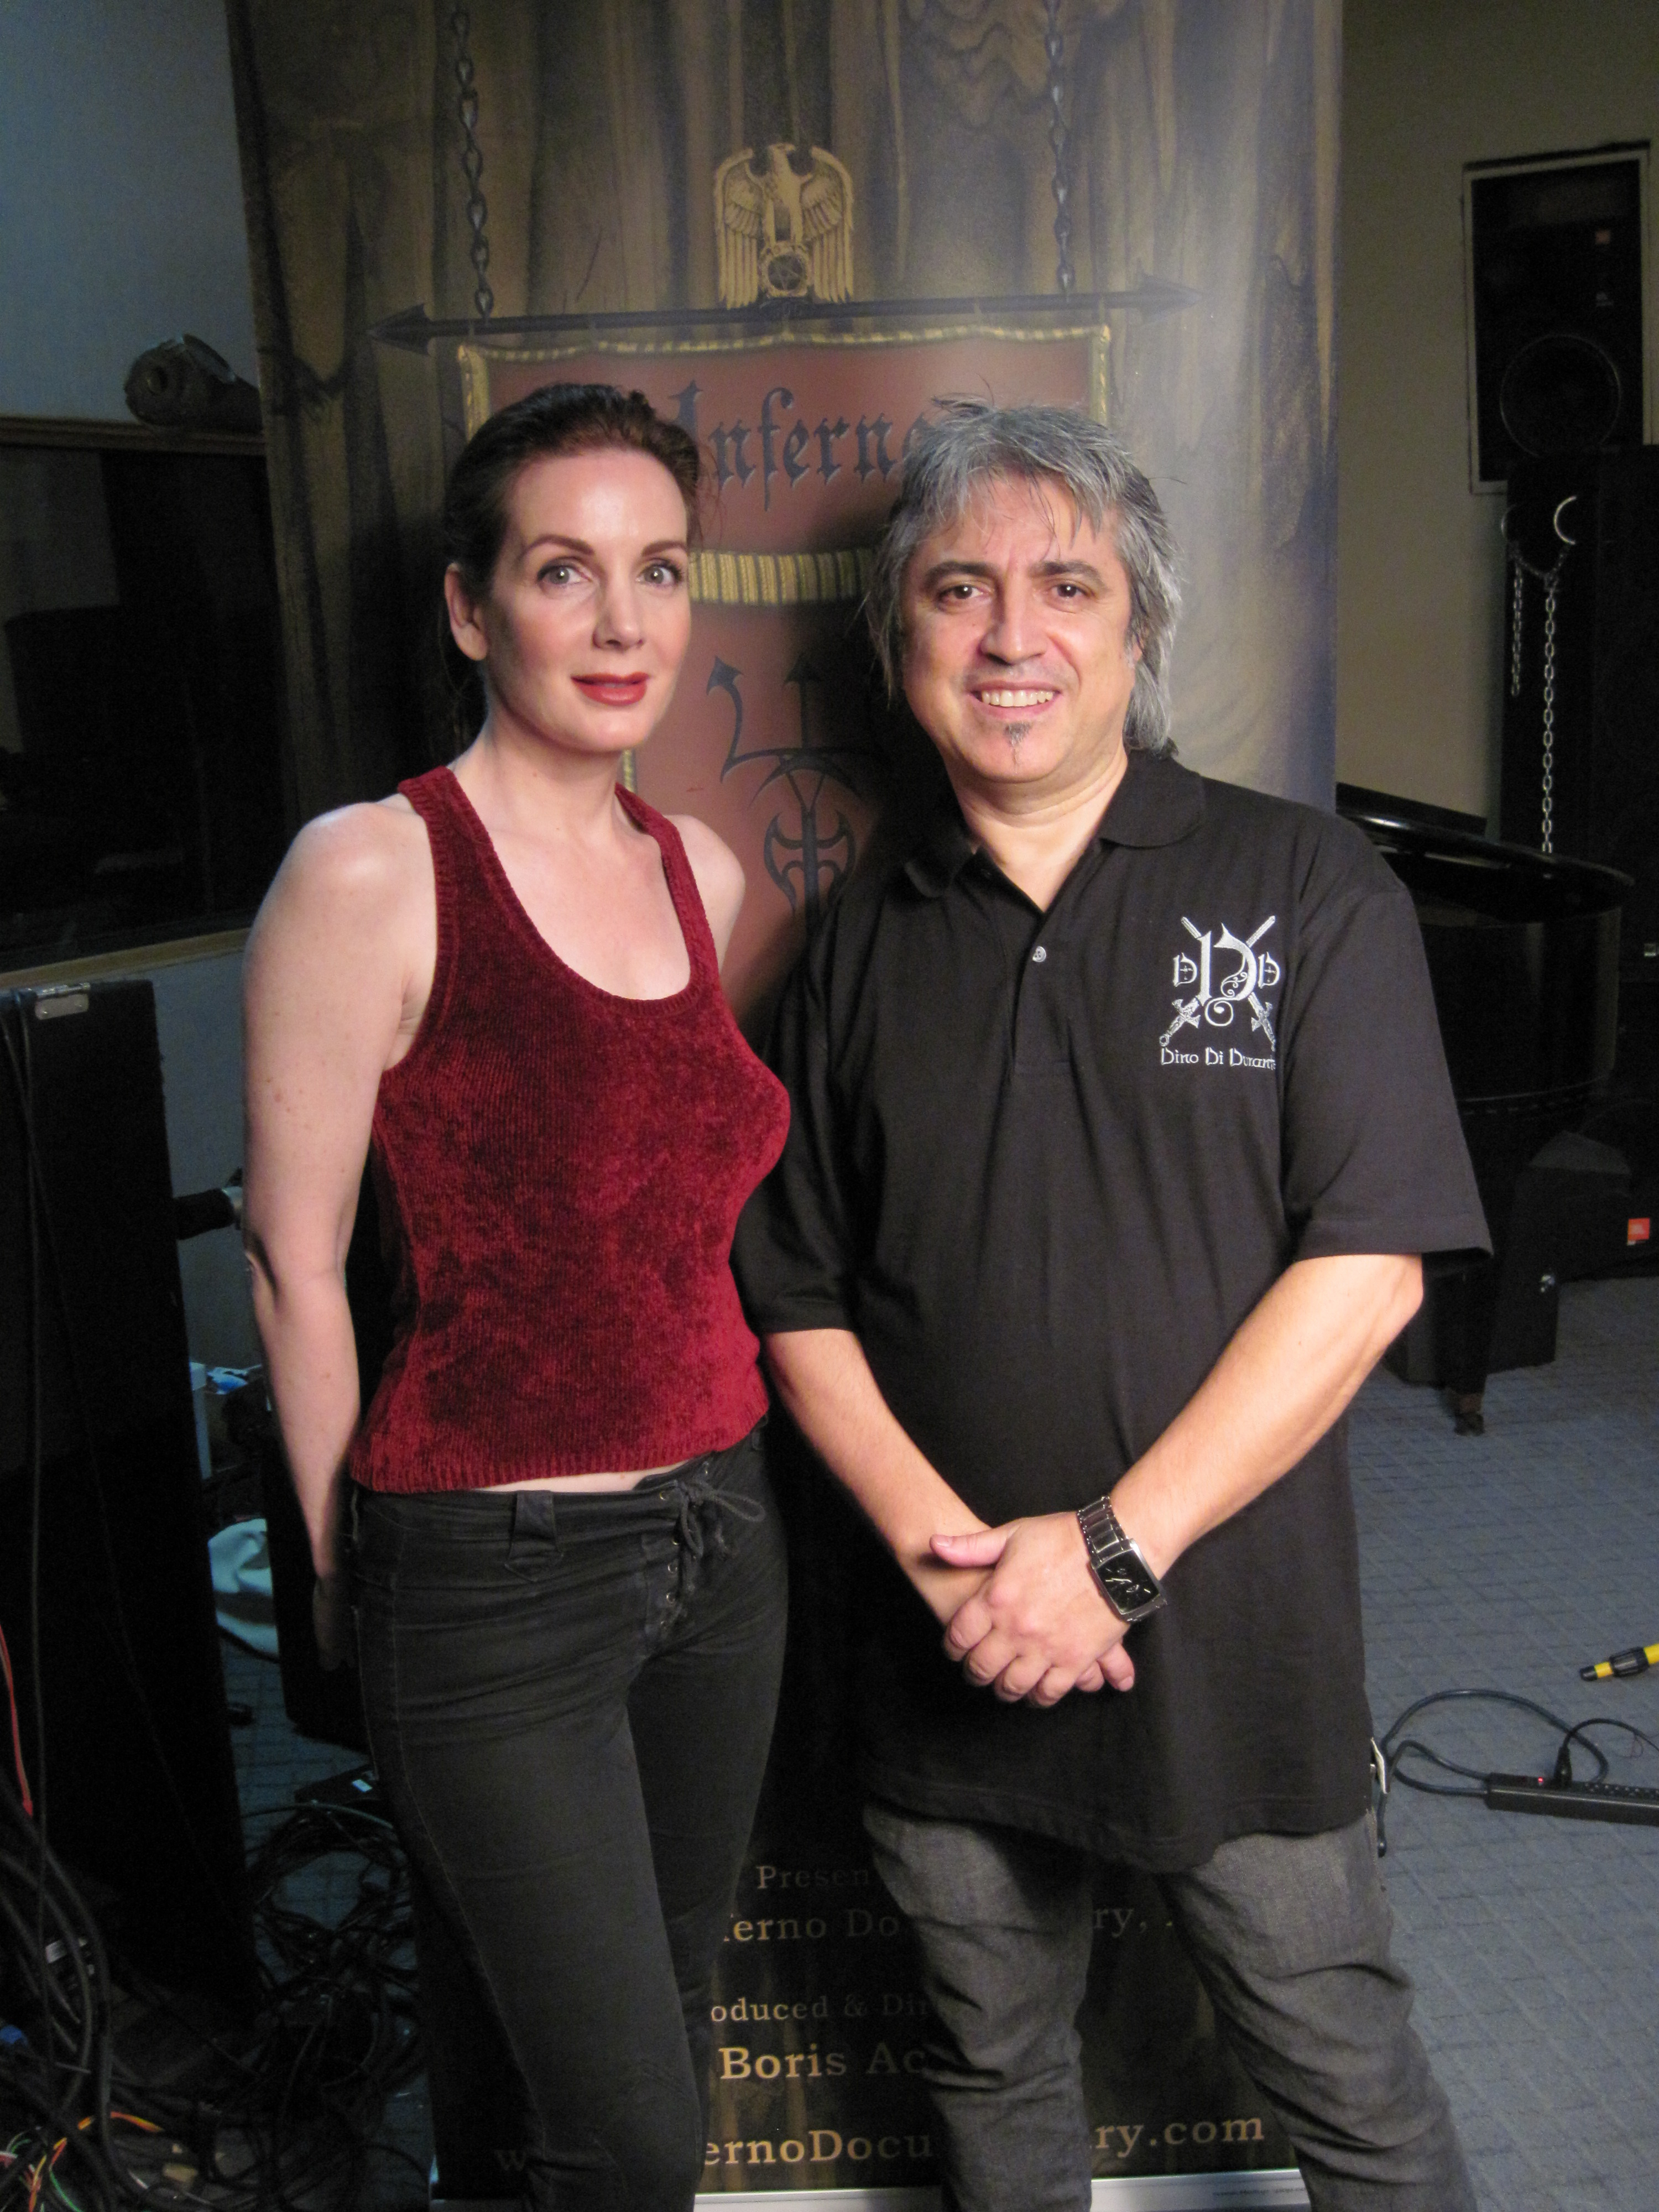 Helene Cardona and Boris Acosta during sessions of Dante's Hell Animated, Dante's Hell Documented and Dante's Purgatorio Documented